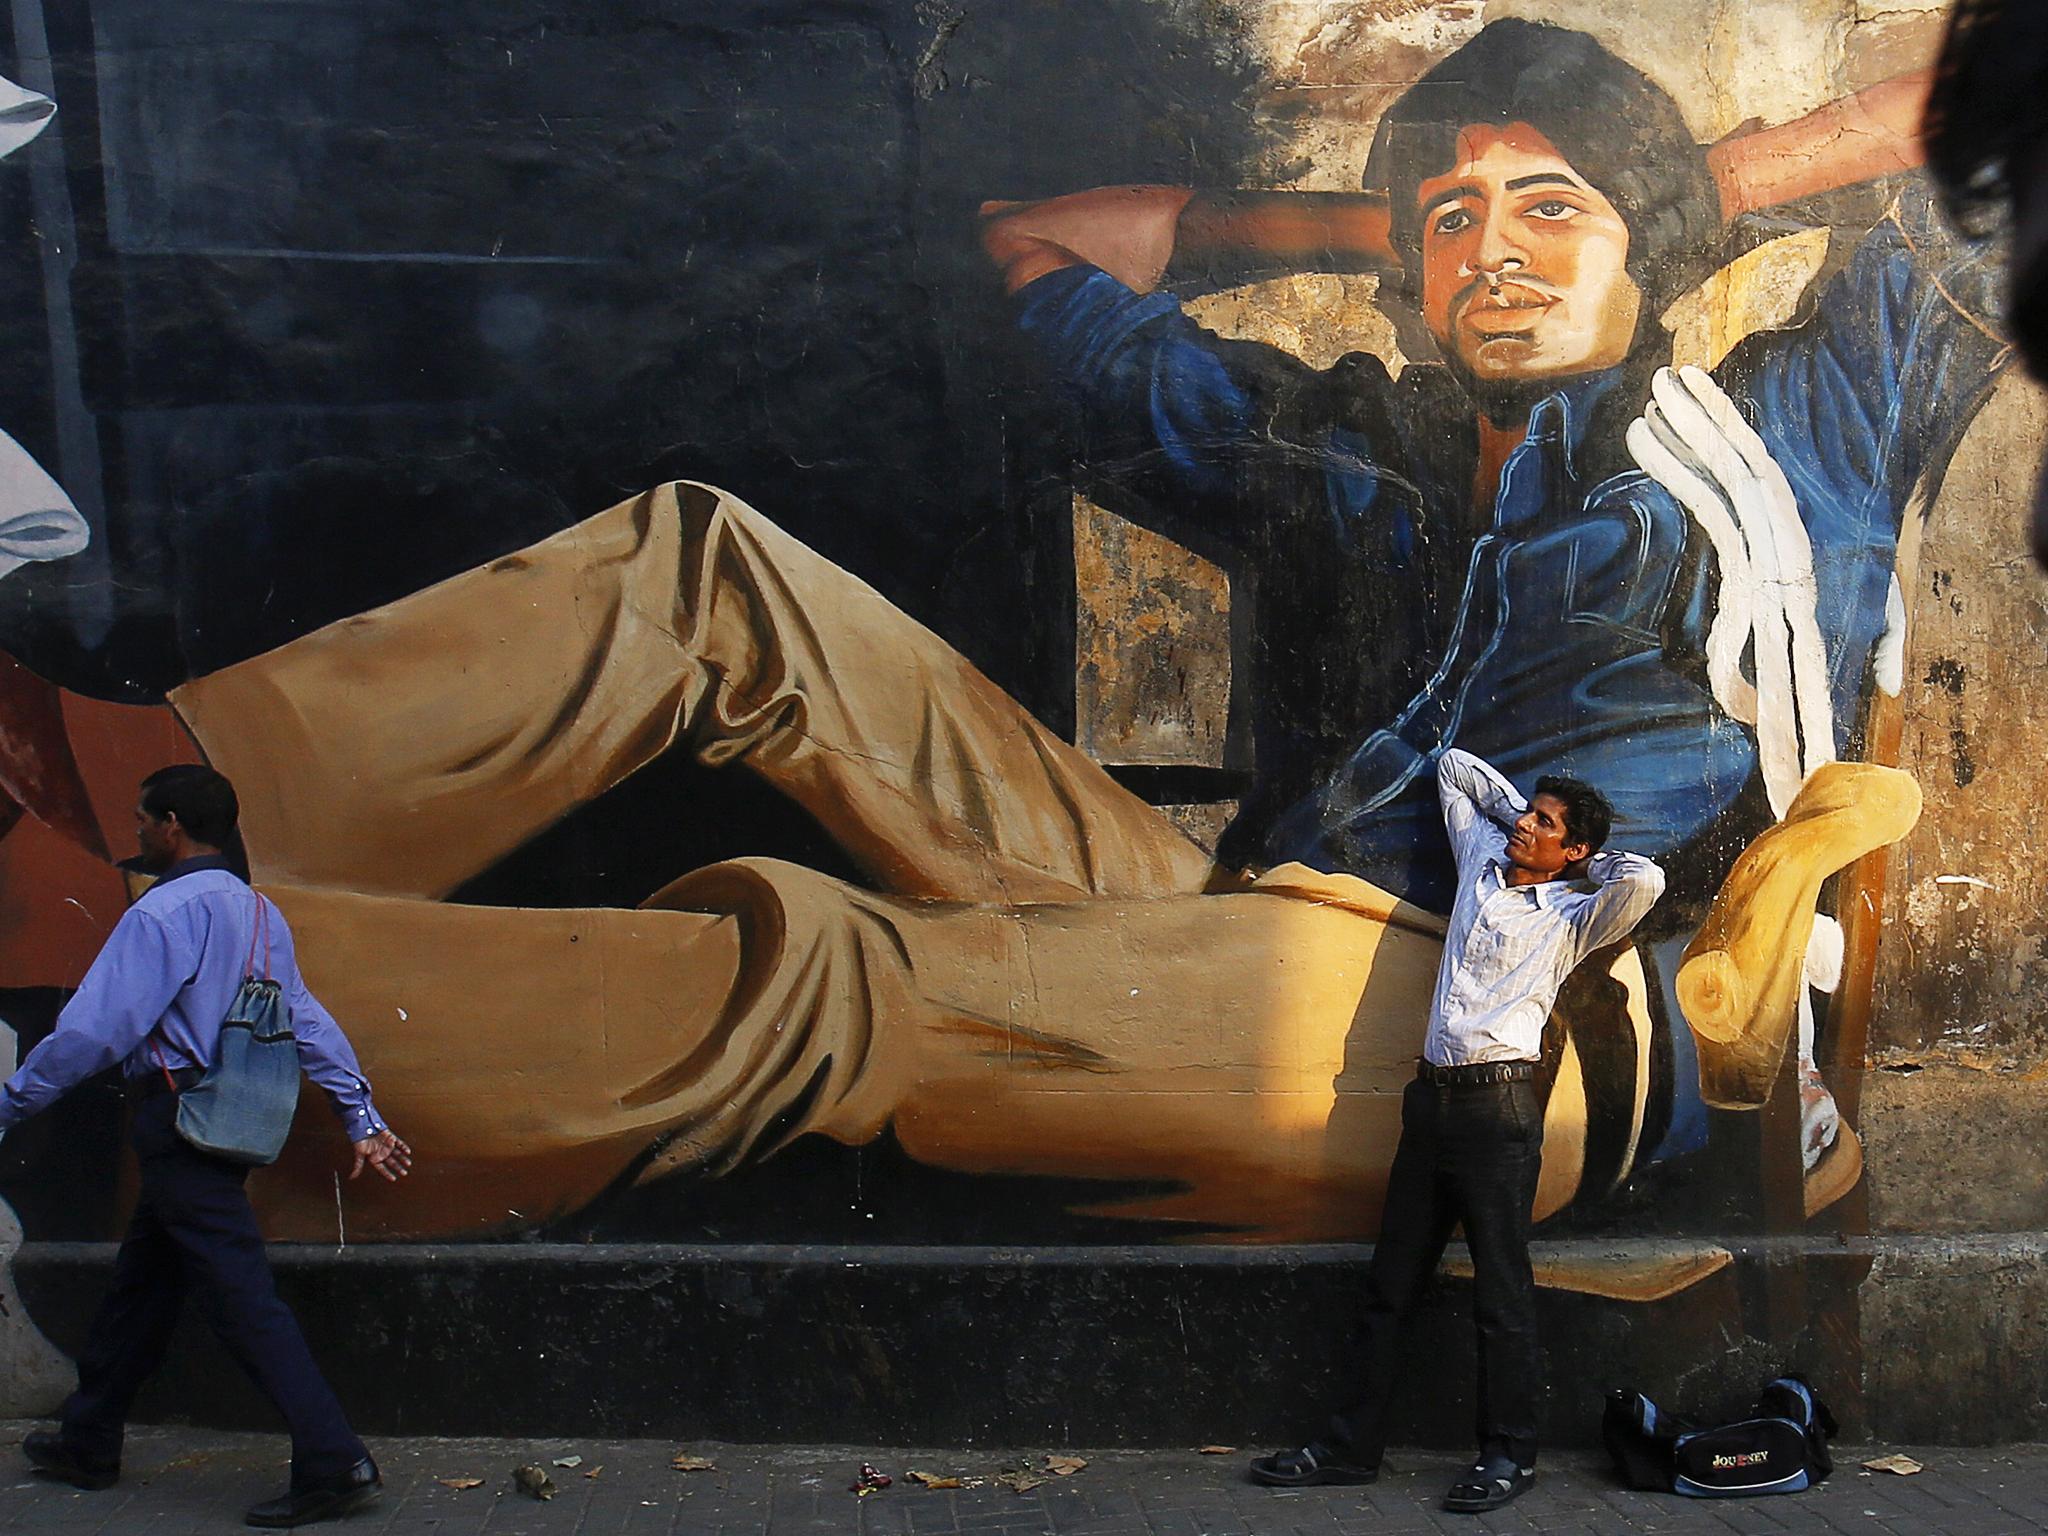 The 32-year-old aspiring film actor, poses in front of a mural of actor Amitabh Bachchan